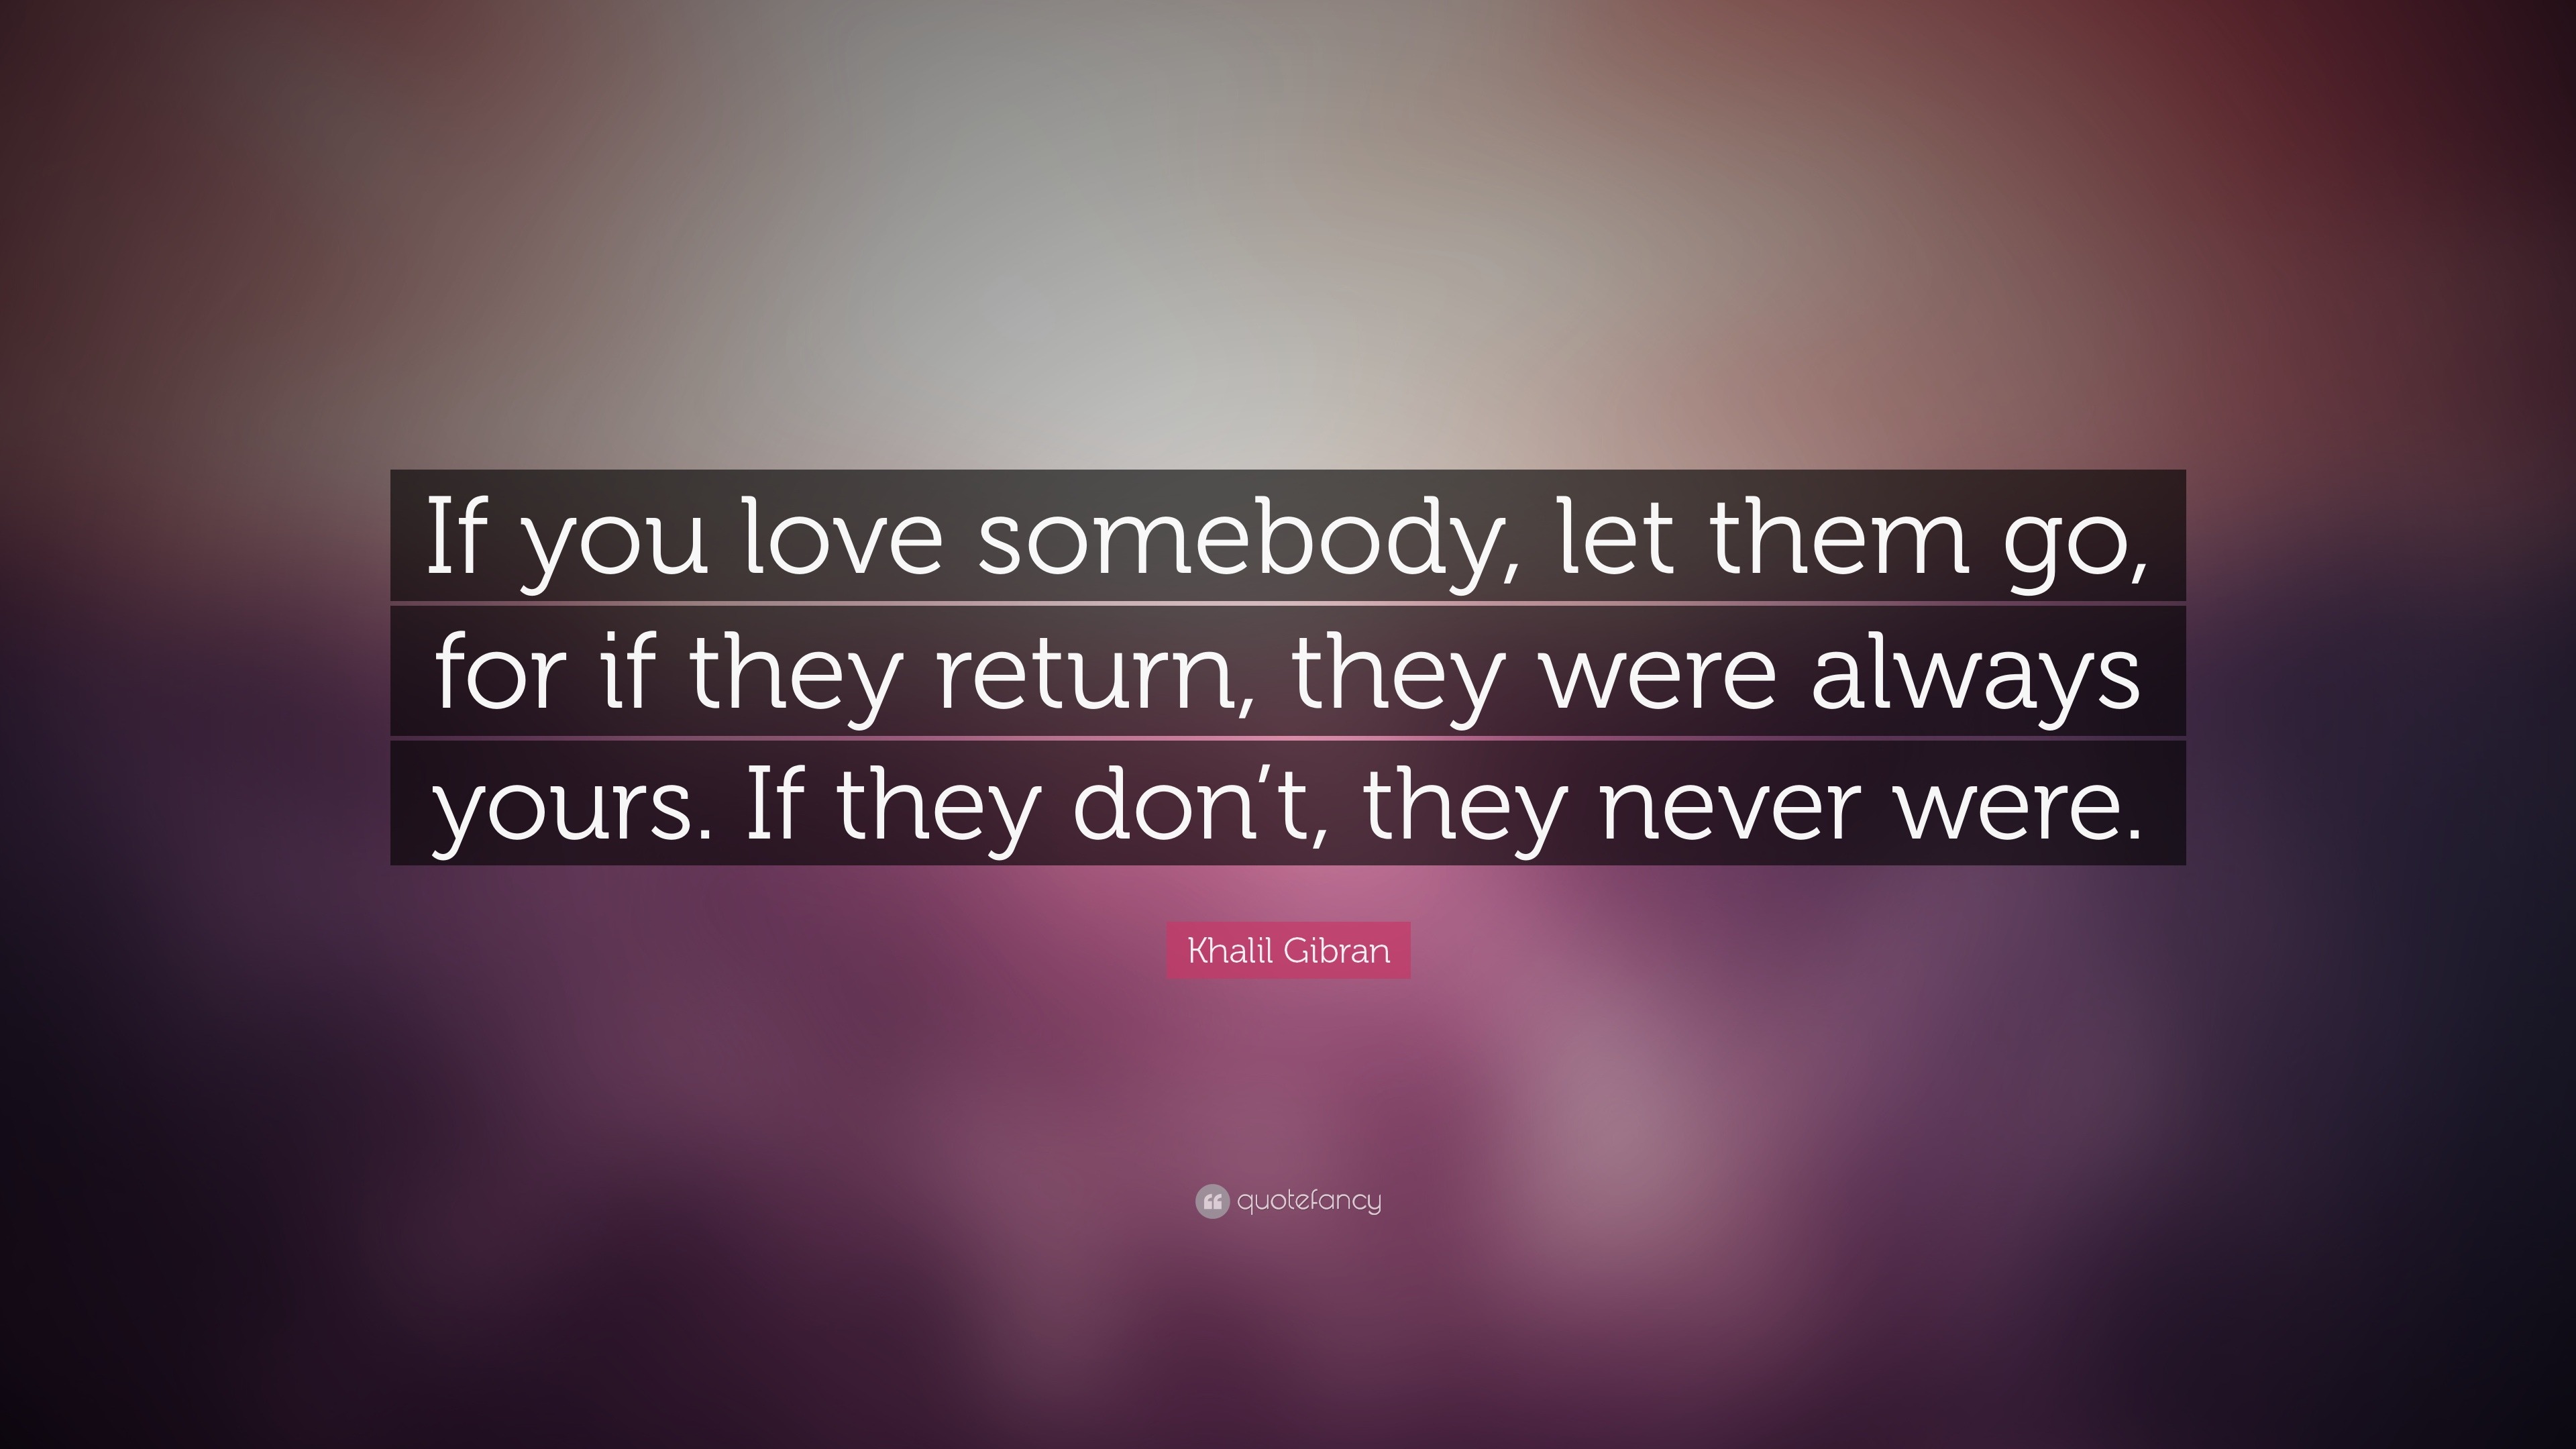 Khalil Gibran Quote: “If you love somebody, let them go, for if they